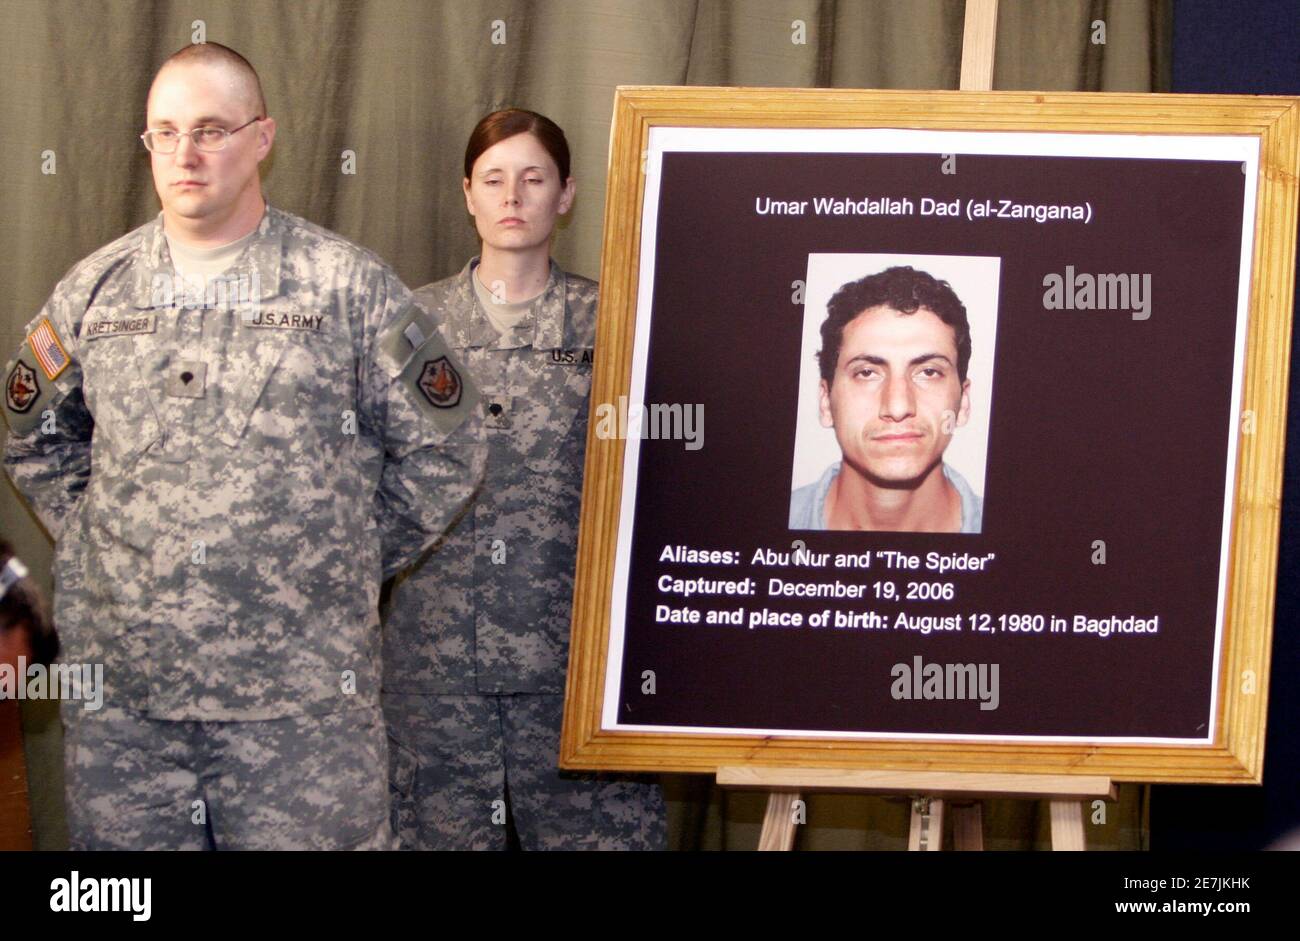 U.S soldiers stand near a picture of Umar Wahdallah Dad (al-Zangana) captured on December 19, 2006 during a media conference for Maj. Gen. William B. Caldwell IV, Multi-National Force-Iraq Spokesman and Brig. Gen. C. Mark Gurganus, Commanding General, Ground Combat Element, Multi-National Force-West, at the heavily fortified Green Zone area in Baghdad on May 16, 2007. REUTERS/Ali Abbas/Pool (IRAQ) Stock Photo